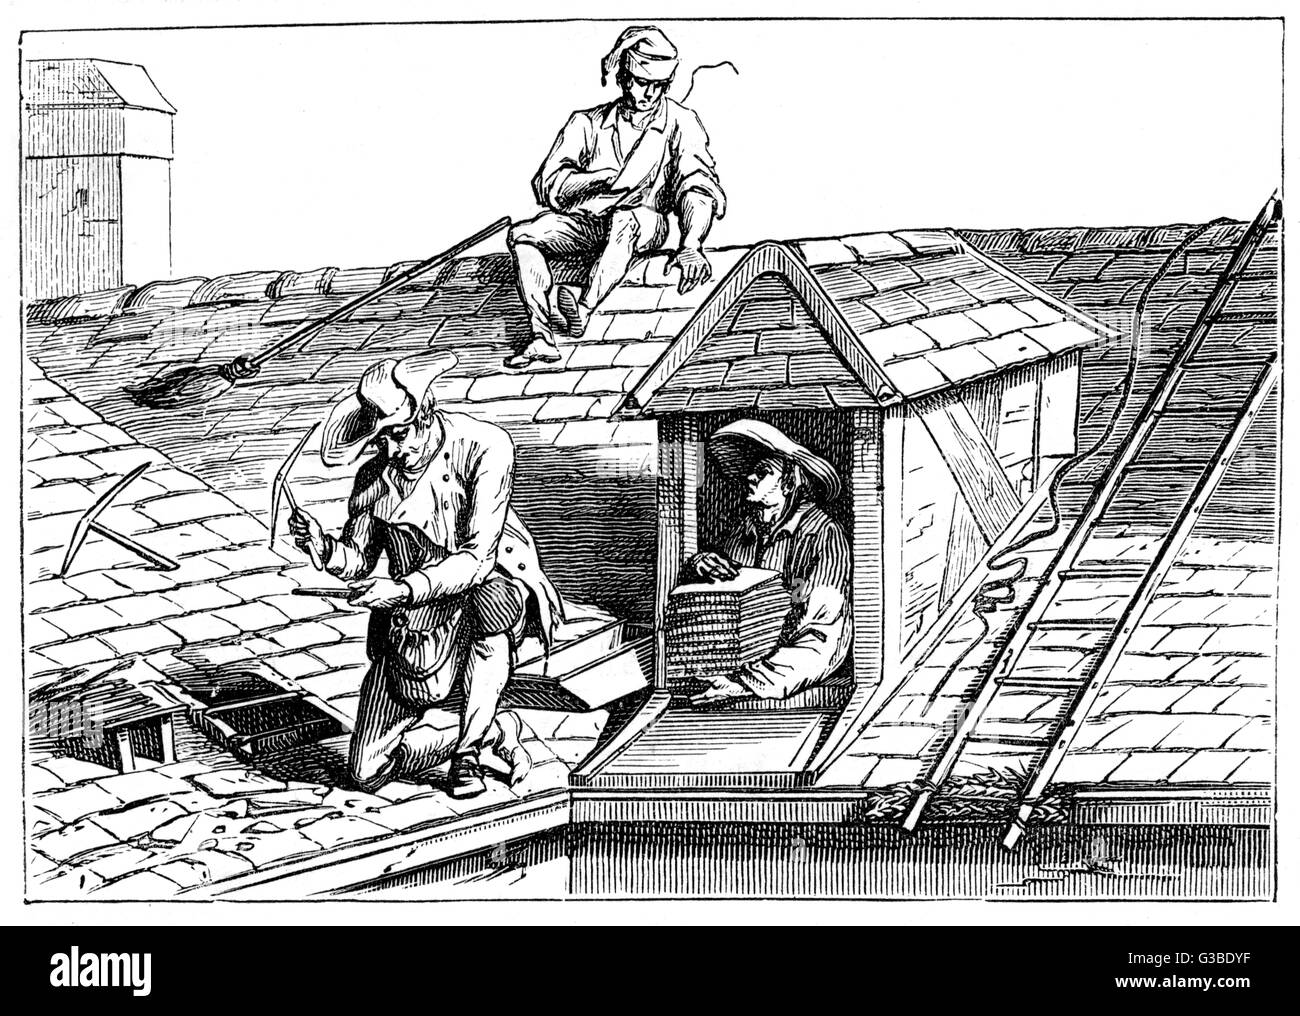 Three workers replace damaged  tiles on a roof        Date: 18th century Stock Photo